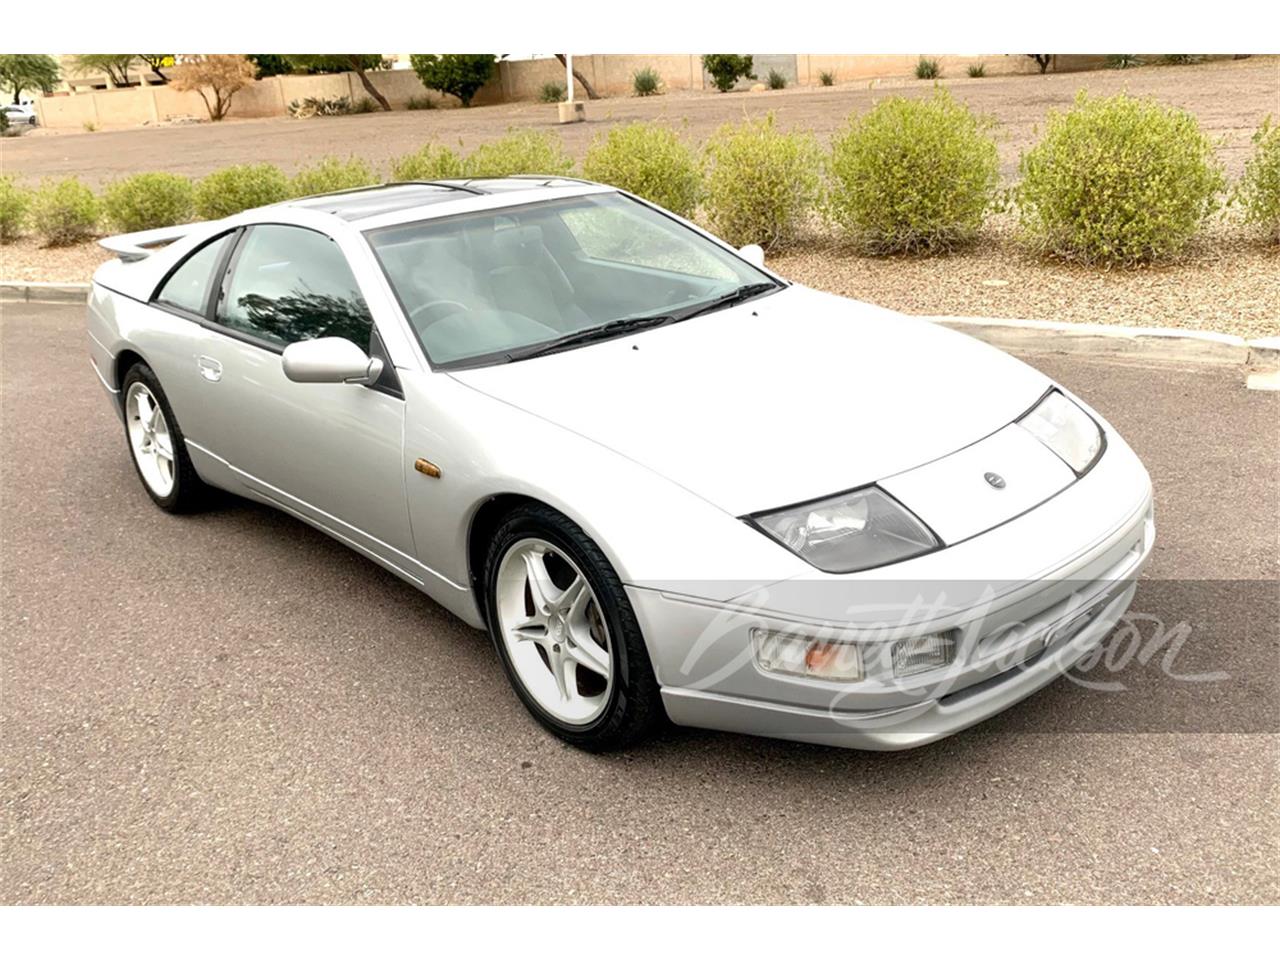 For Sale at Auction: 1995 Nissan 300ZX in Scottsdale, Arizona for sale in Scottsdale, AZ